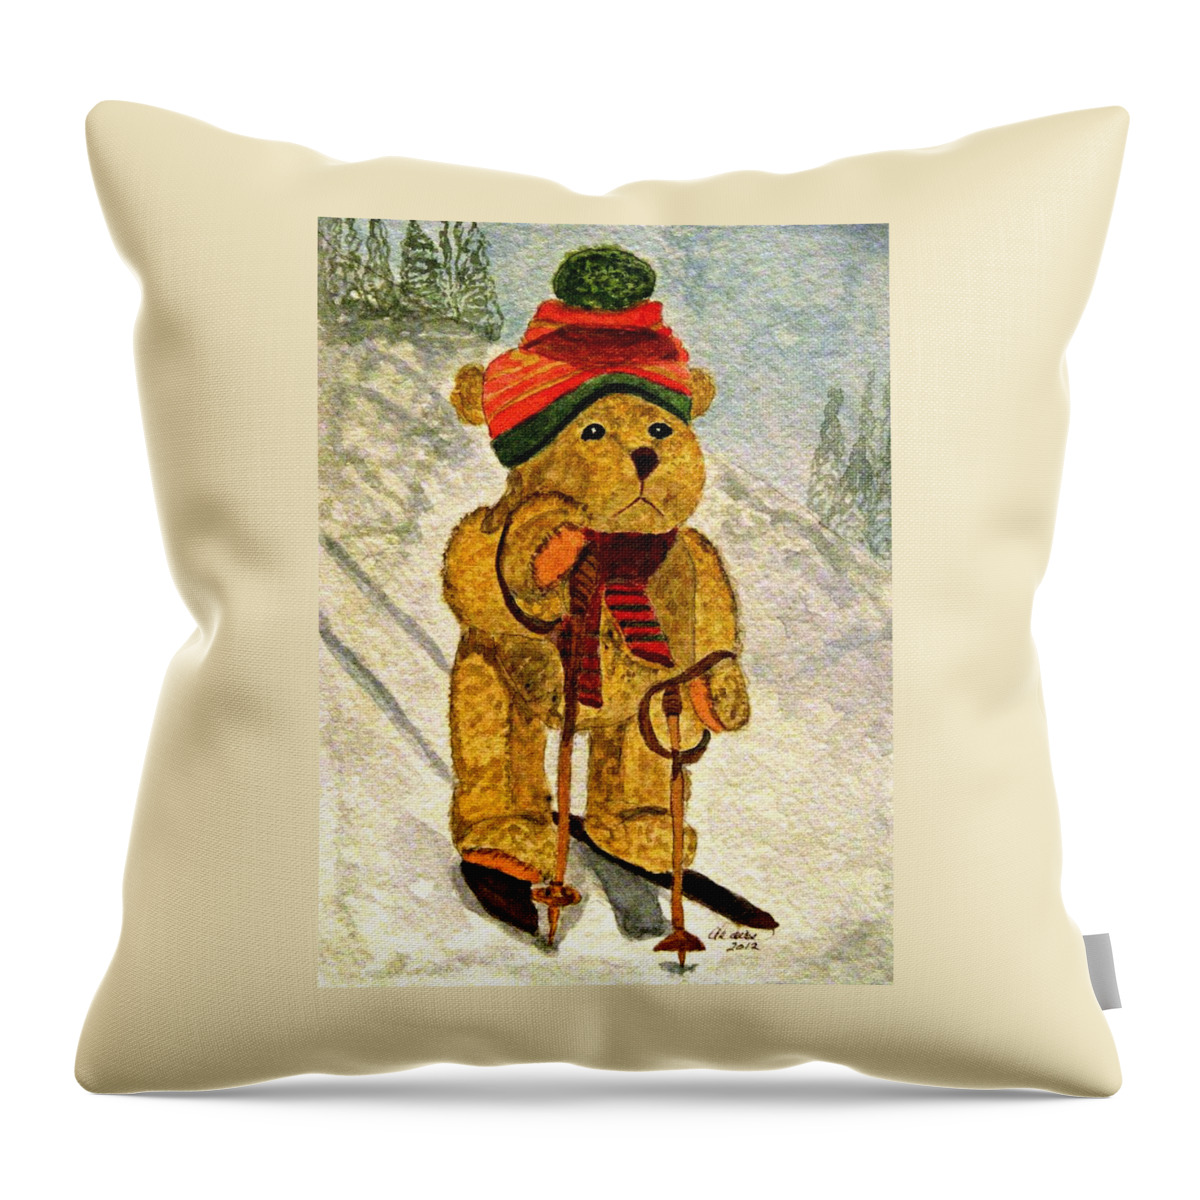 Bears Throw Pillow featuring the painting Learning To Ski by Angela Davies